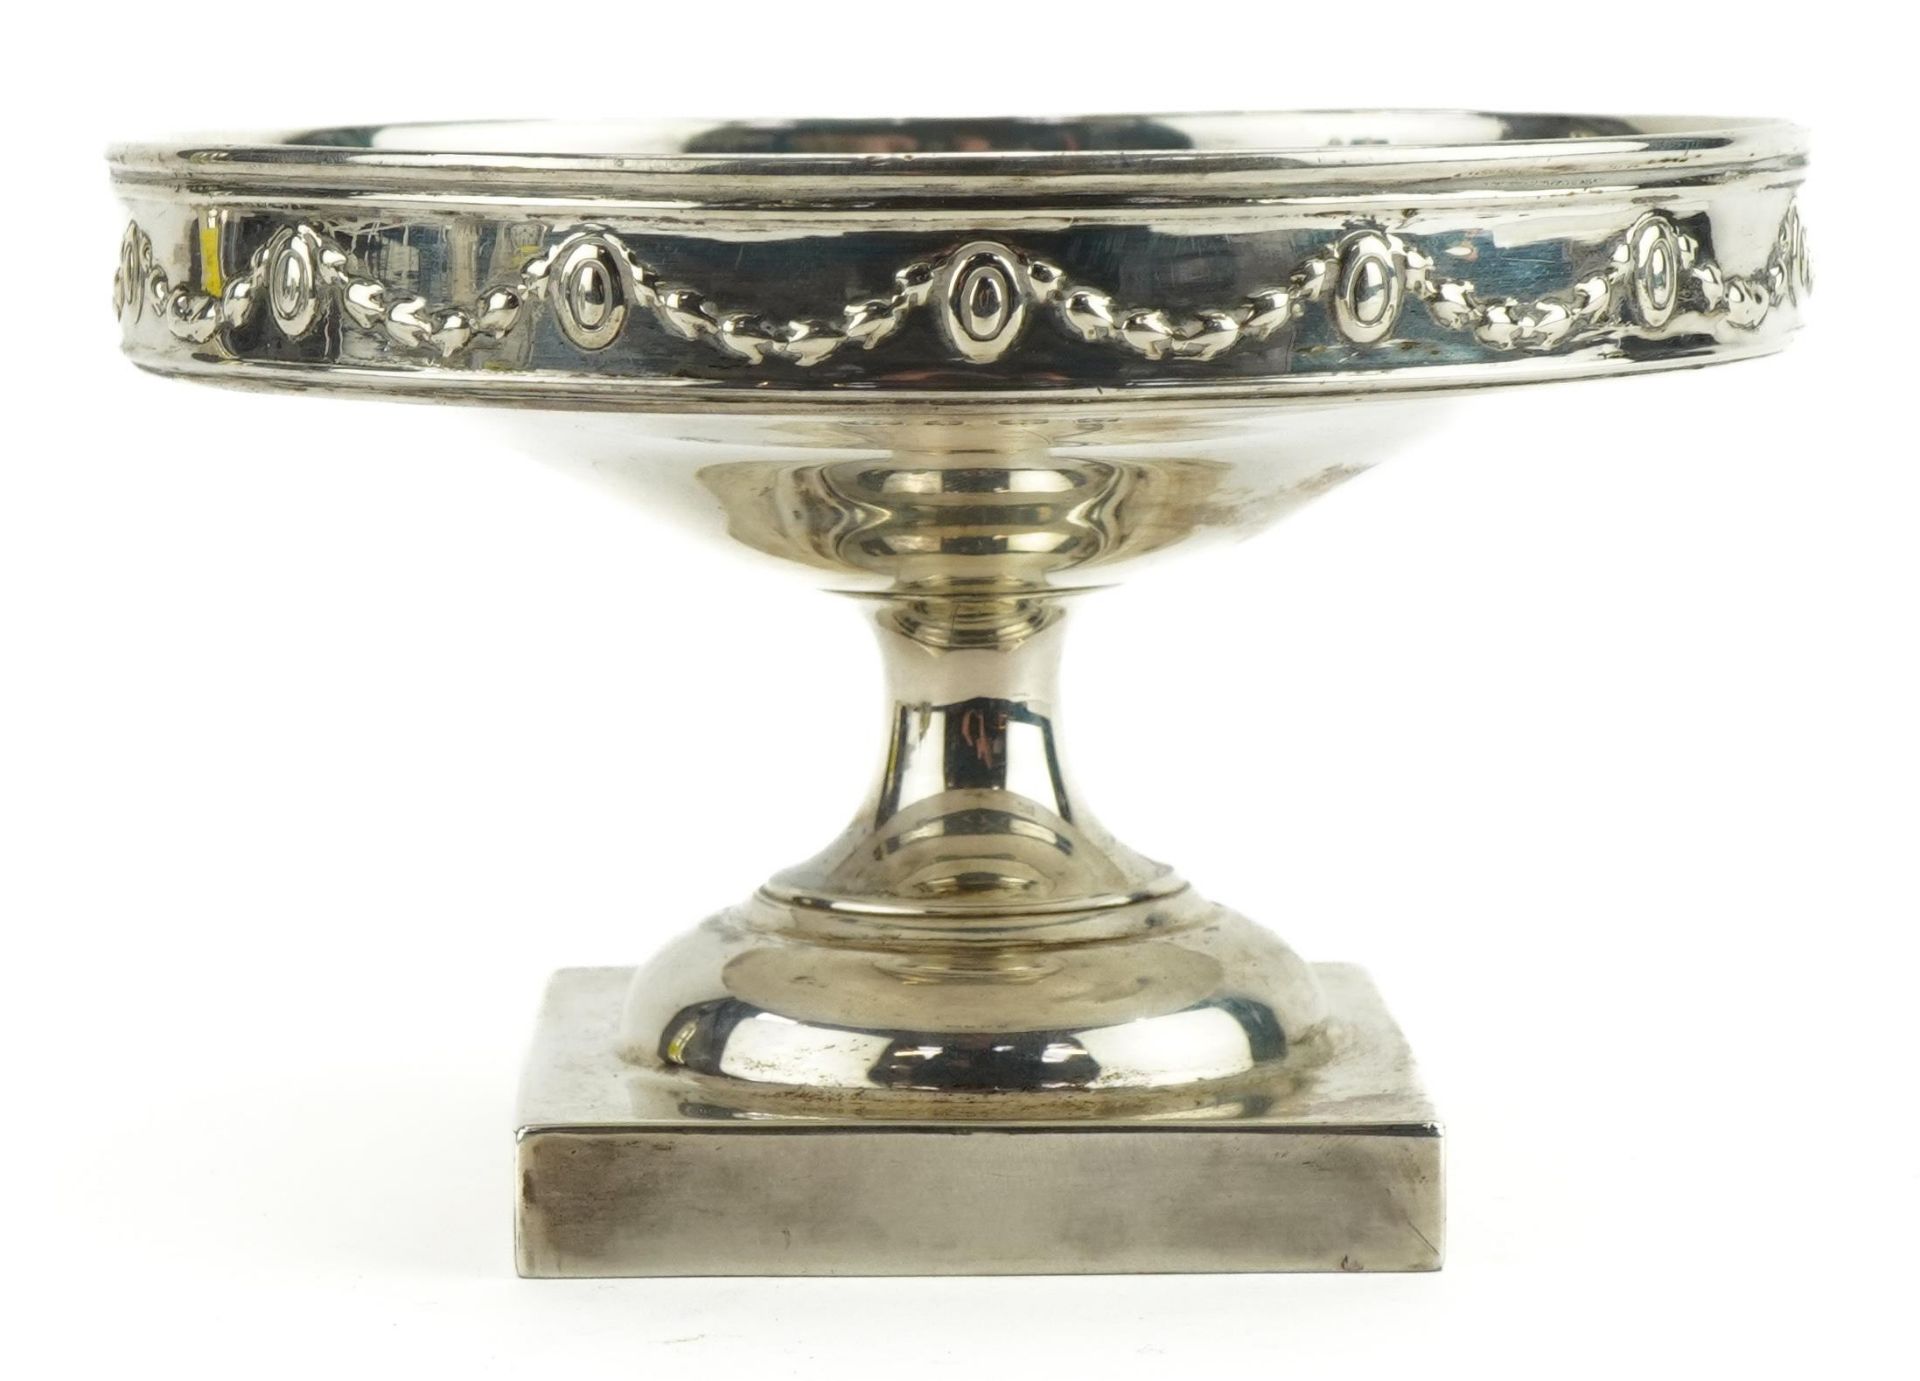 S Blanckensee & Son Ltd, Regency style pedestal dish decorated in relief with swags, Birmingham - Image 2 of 4